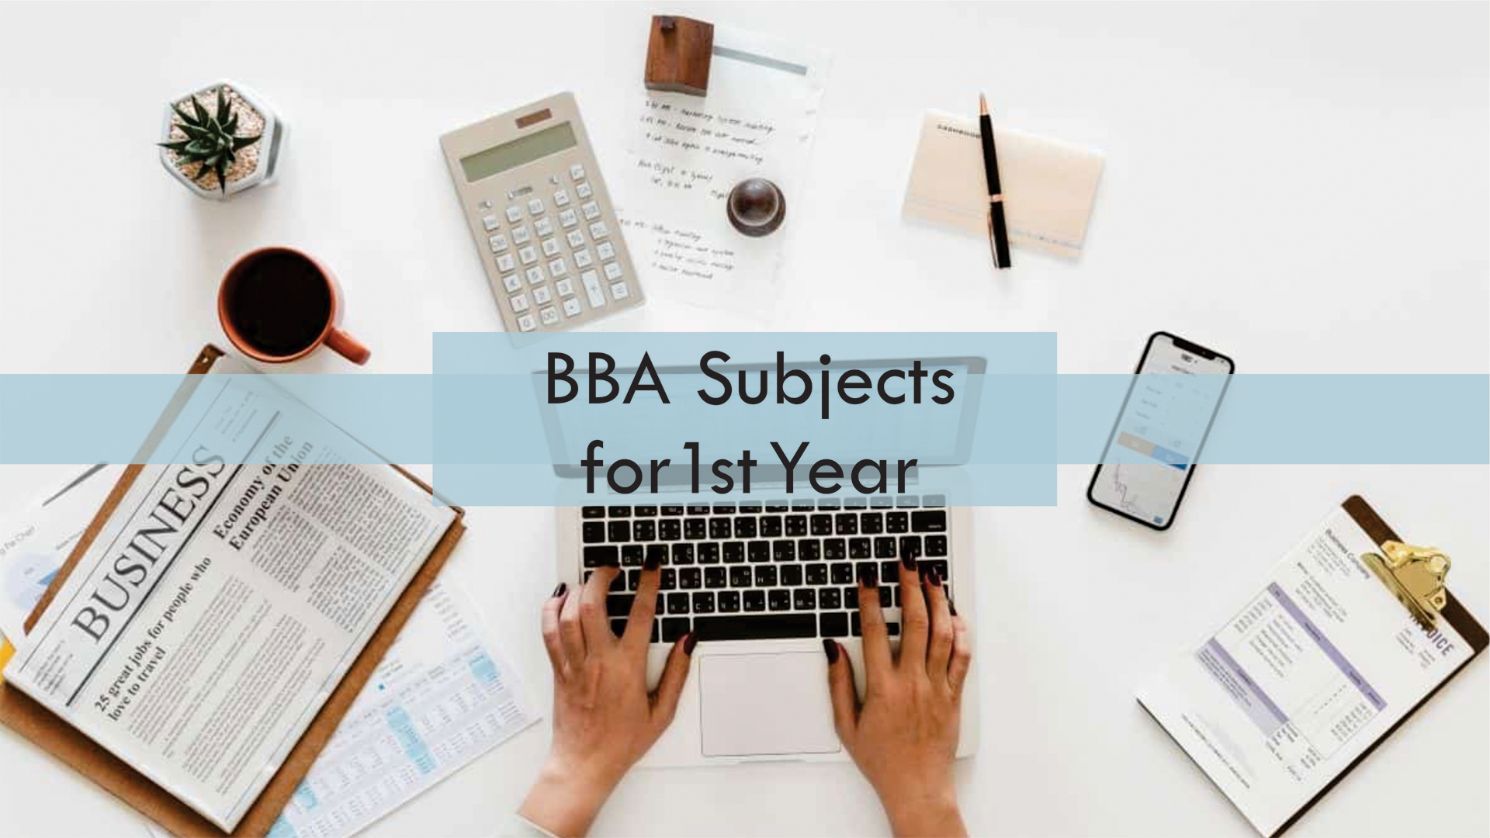 Reasons to pursue a BBA degree